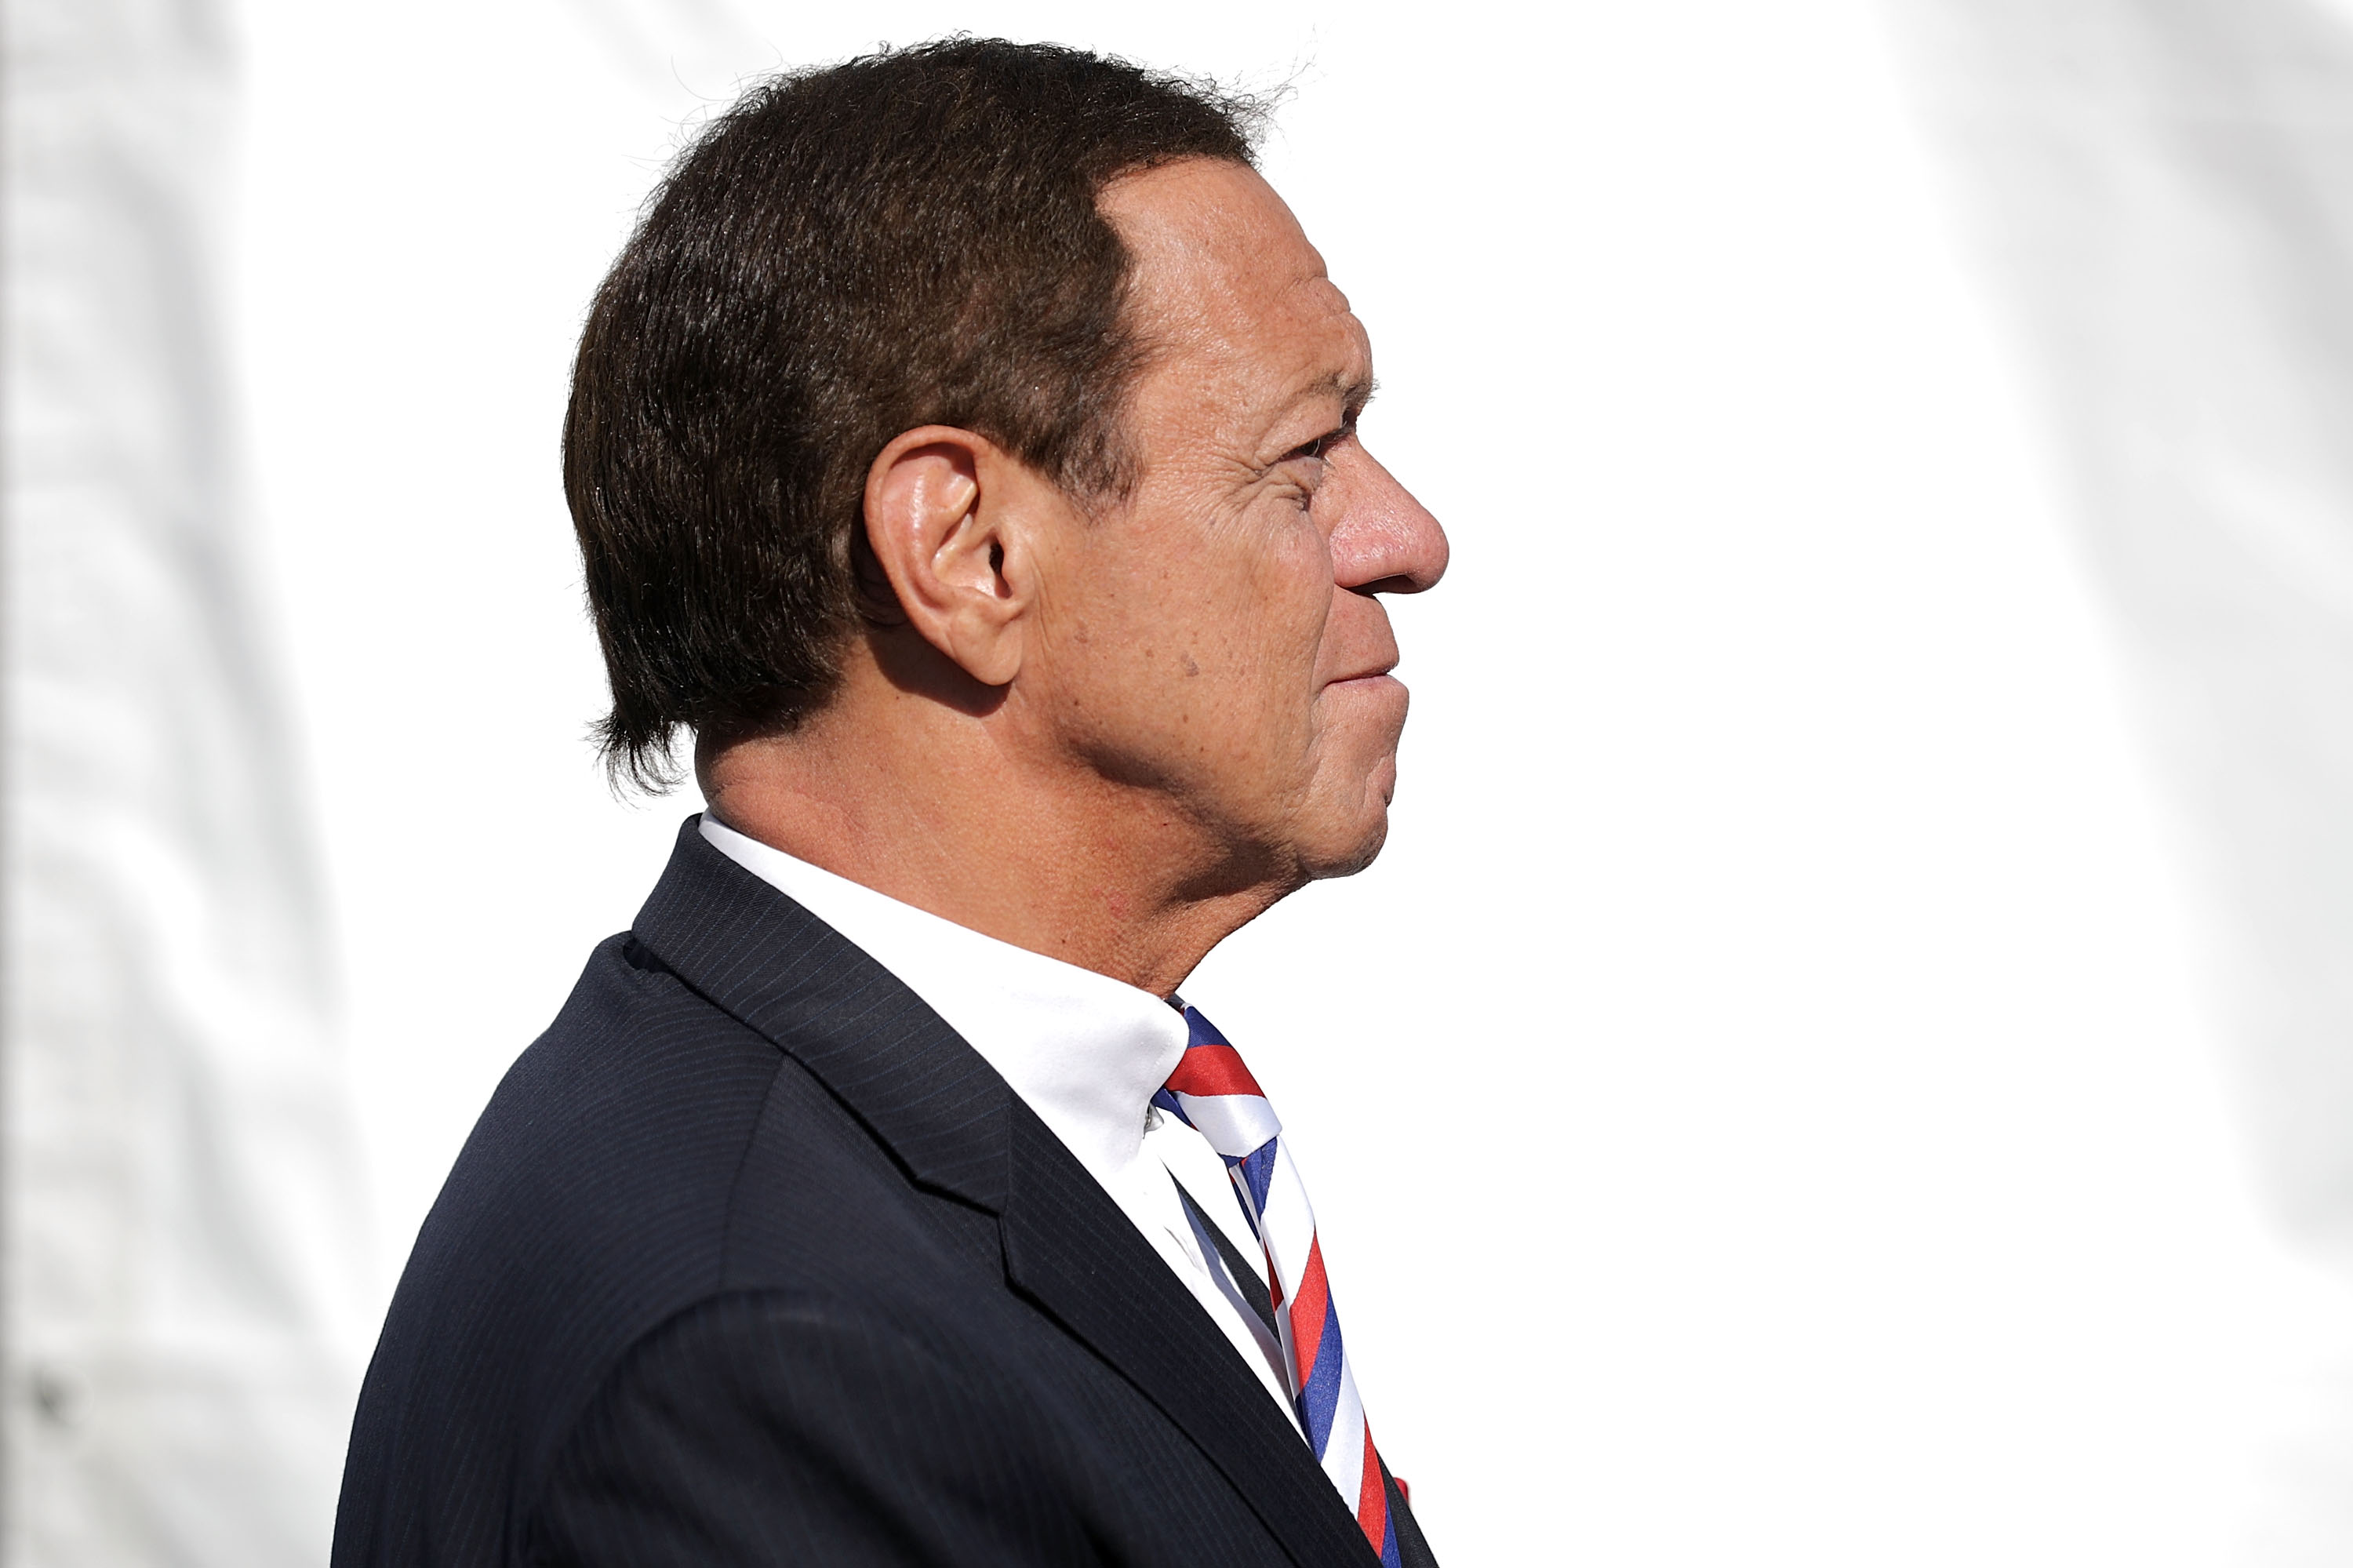 Joe Piscopo Takes Us Inside Hush Money Courtroom, Meeting with Trump